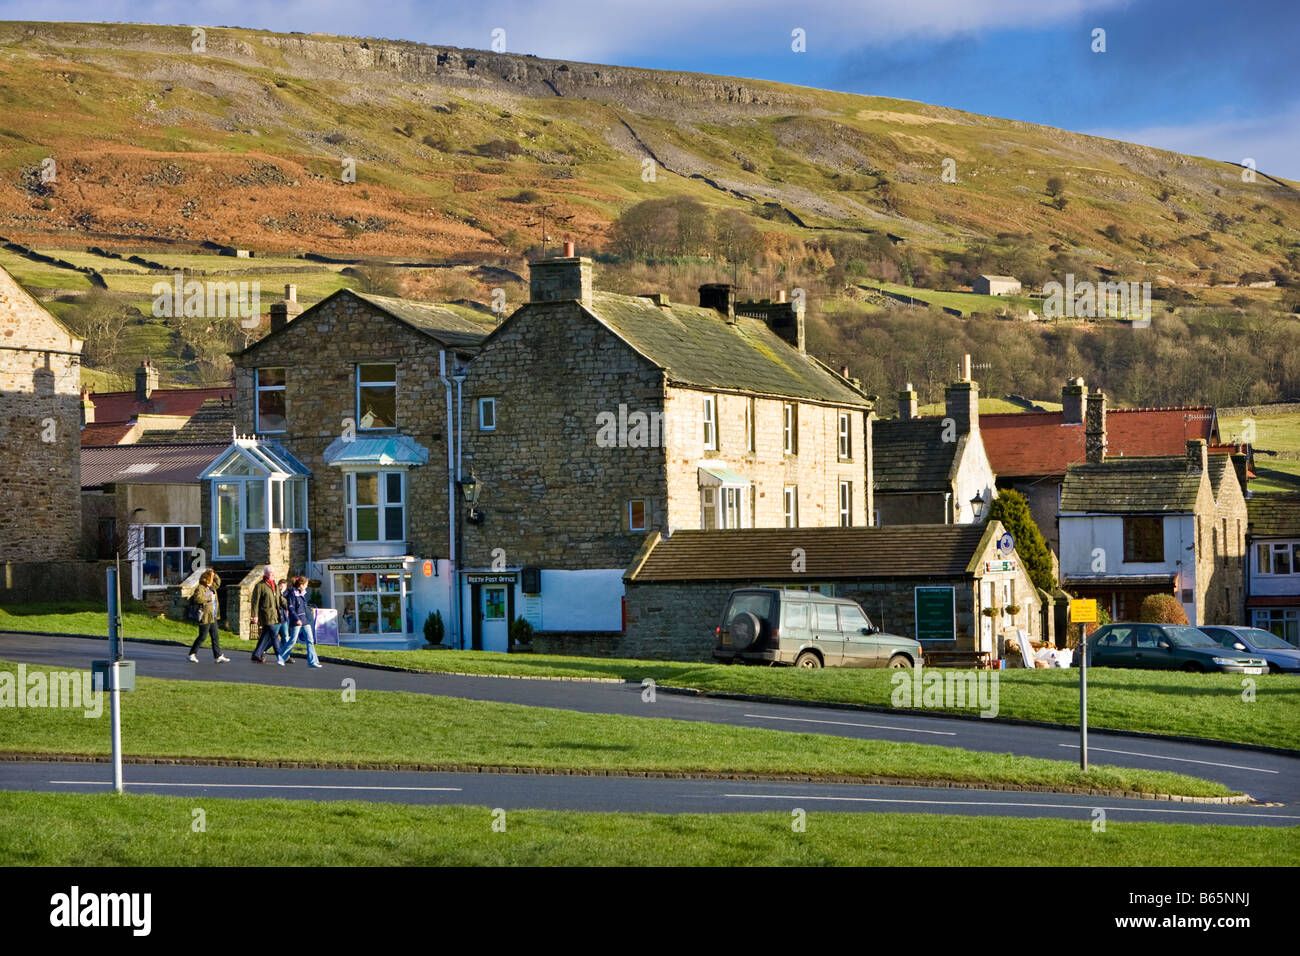 The village of Reeth in Swaledale, Yorkshire Dales, England UK in autumn Stock Photo